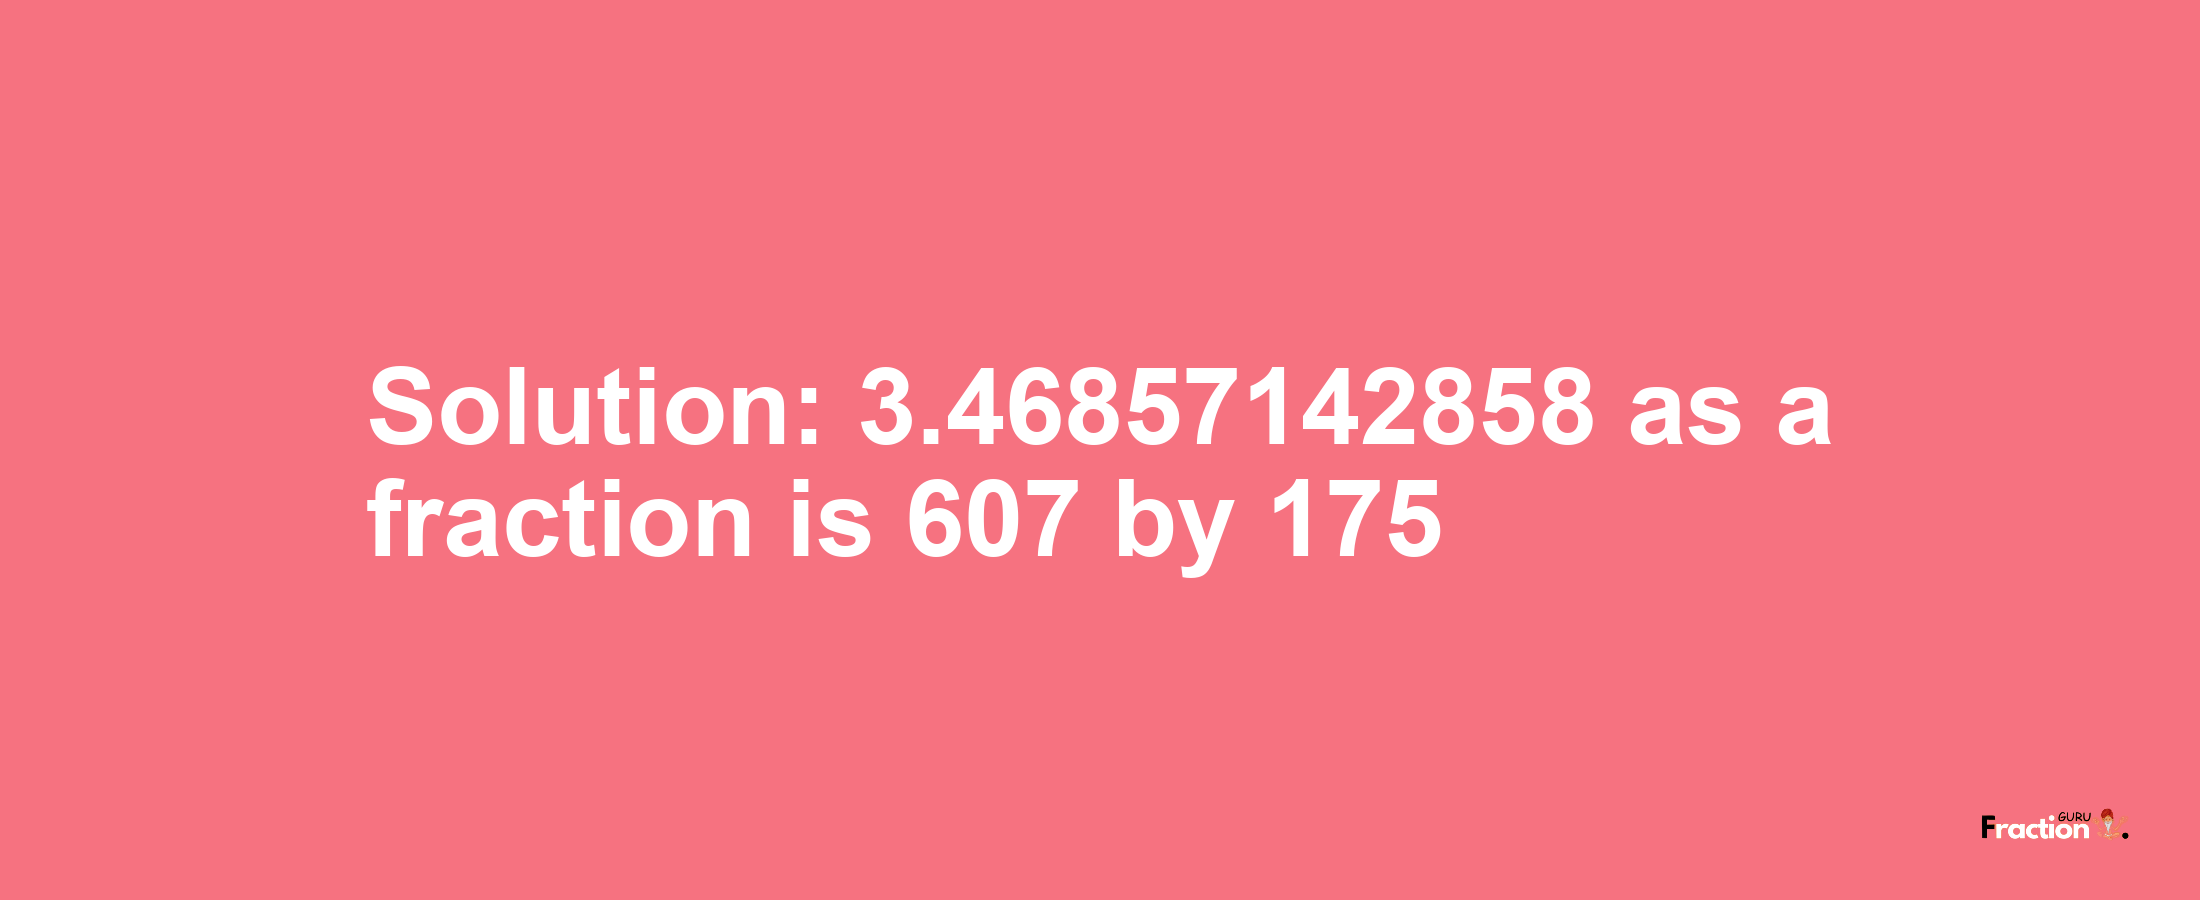 Solution:3.46857142858 as a fraction is 607/175